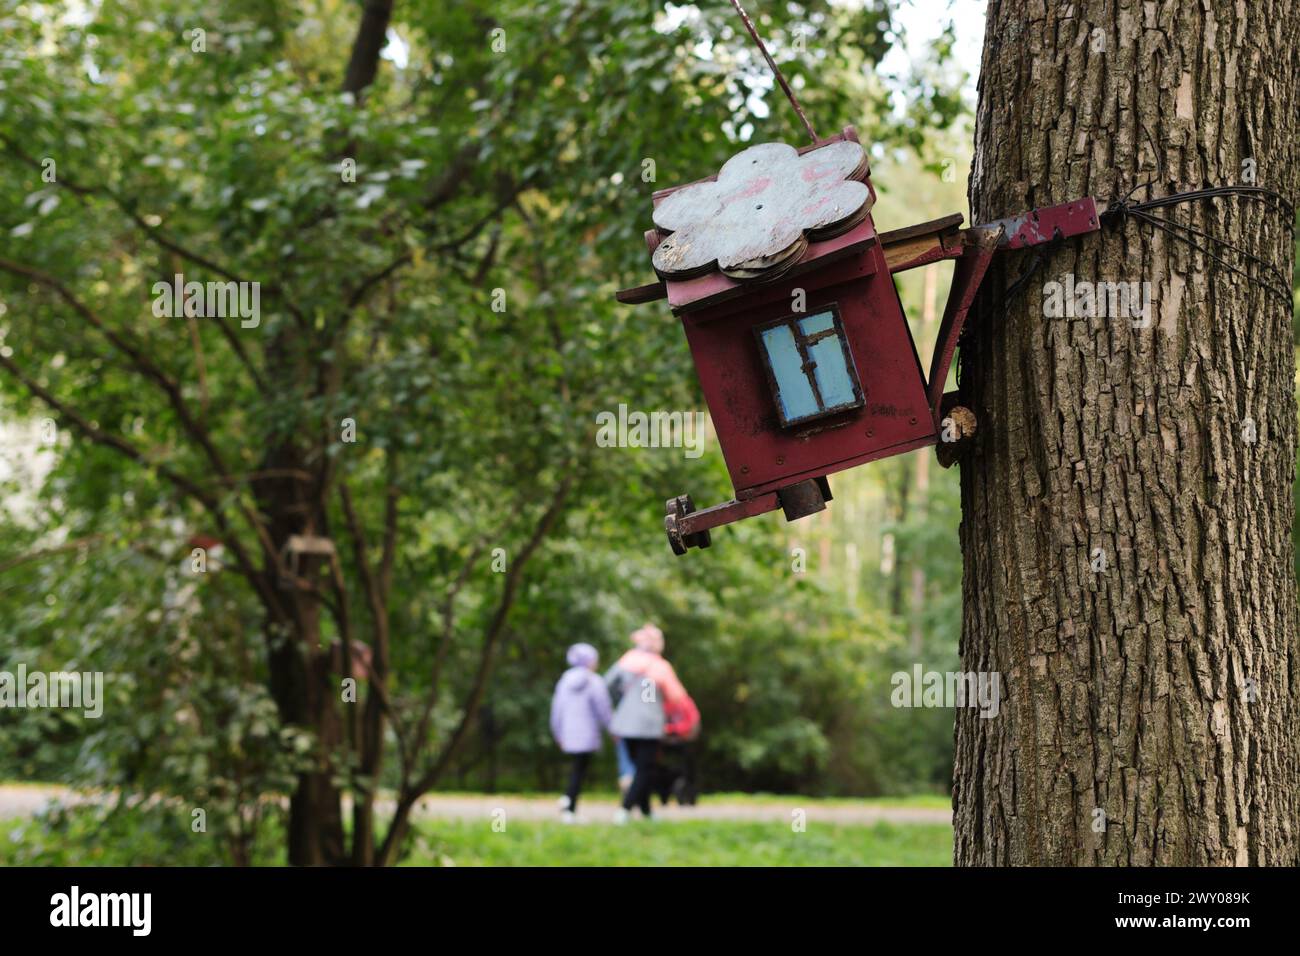 Beautiful small house with blue window on tree. This is the feeder for squirrels and birds Stock Photo